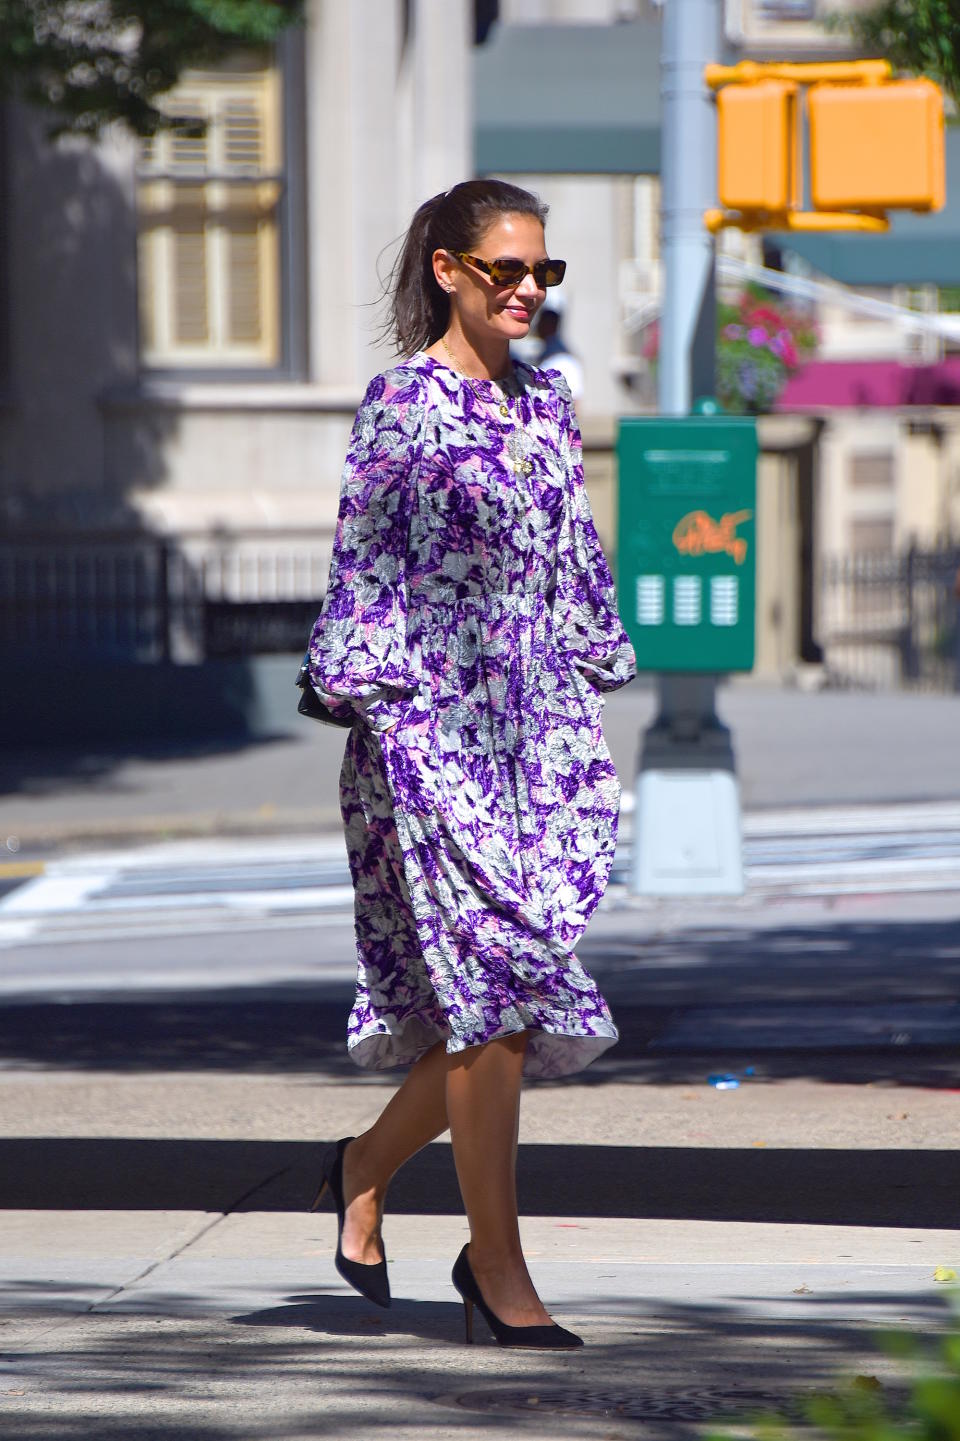 September 17, 2019: Katie Holmes out and about in New York